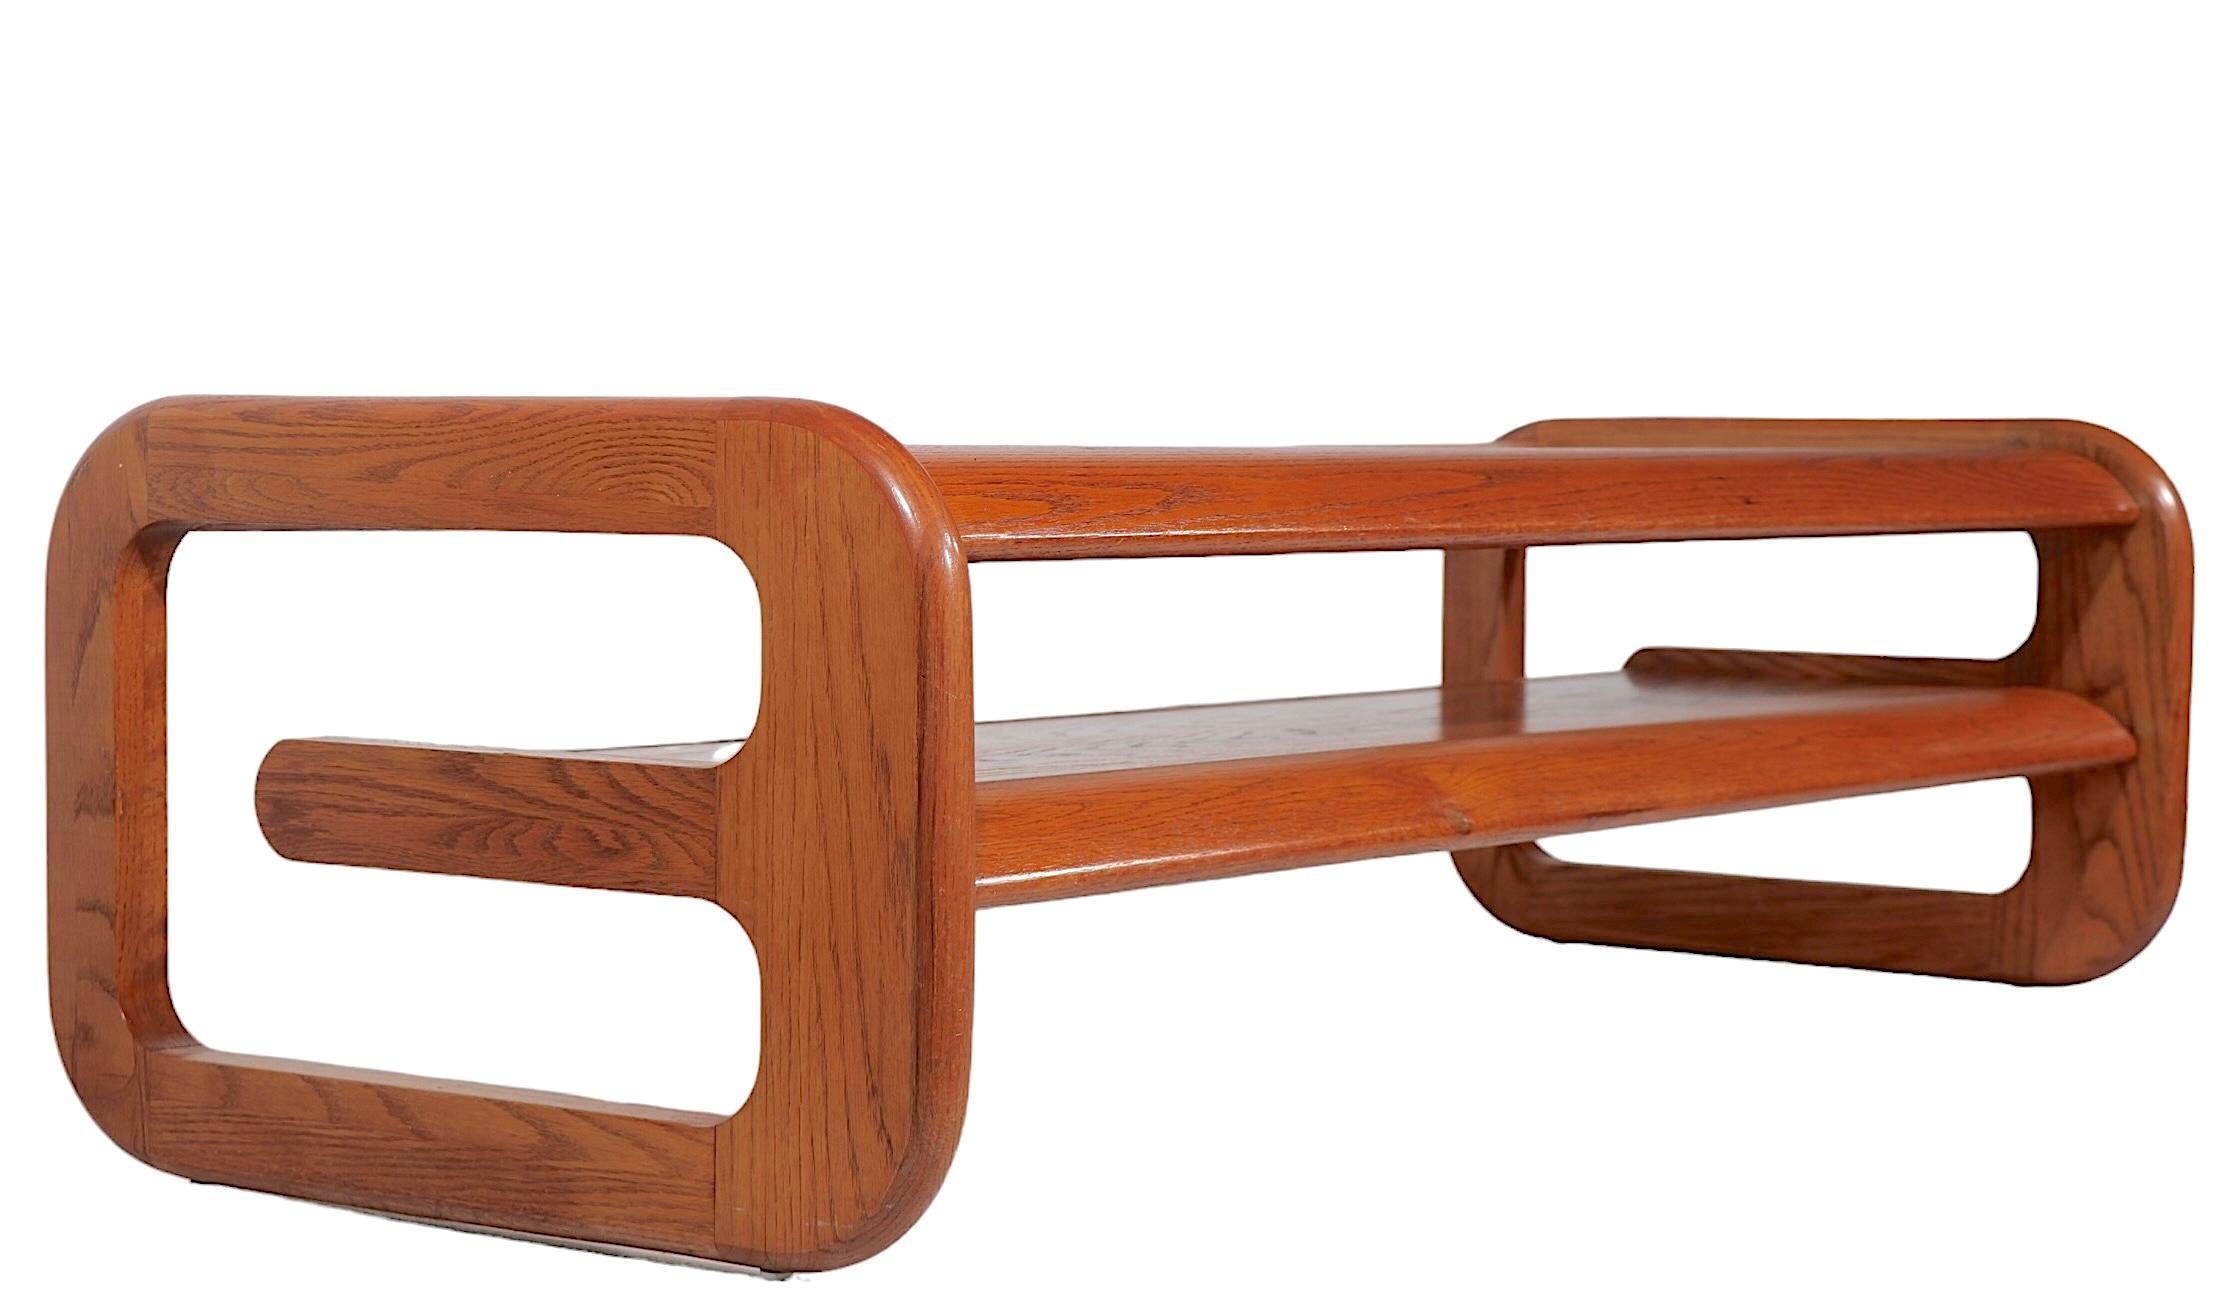  Post Modern Oak and Glass Coffee Table by Lou Hodges for Mersman  c. 1970's In Good Condition For Sale In New York, NY